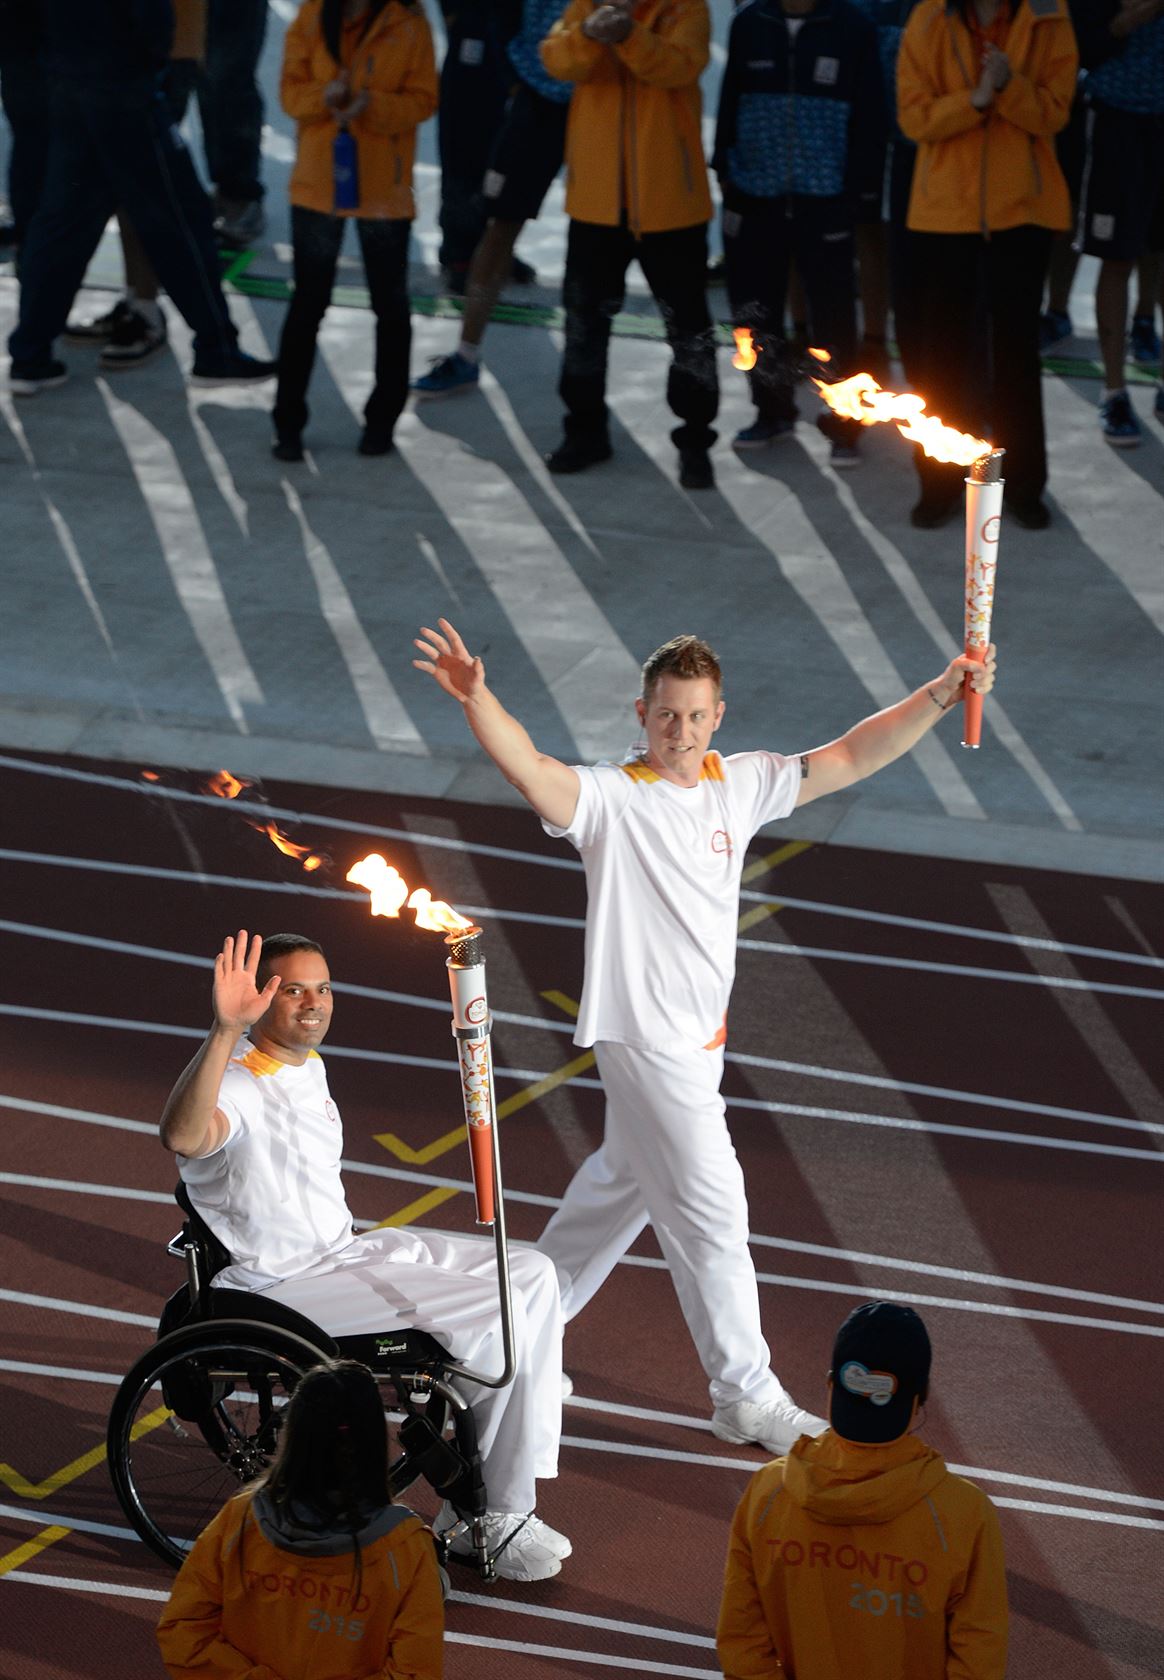 Steve Daniel and Dominic Larocque carry the flame into the stadium